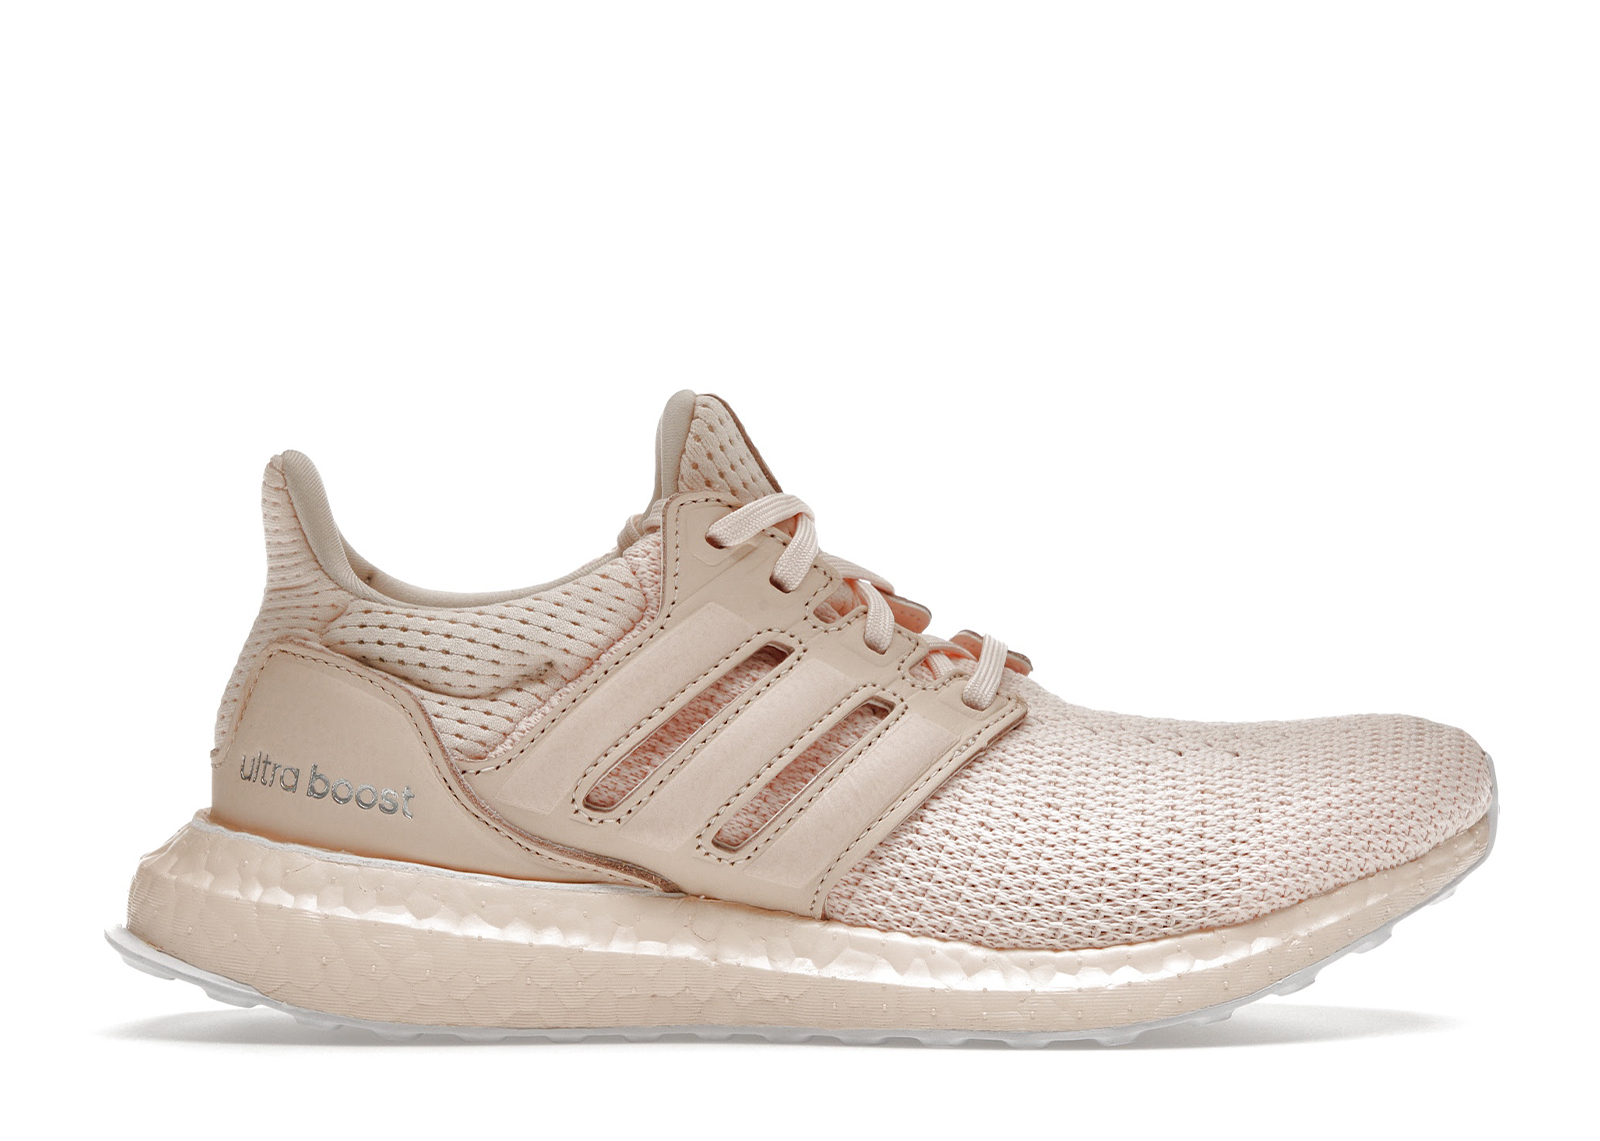 Adidas Ultraboost Shoes Pink Tint 7 - Womens Running Shoes